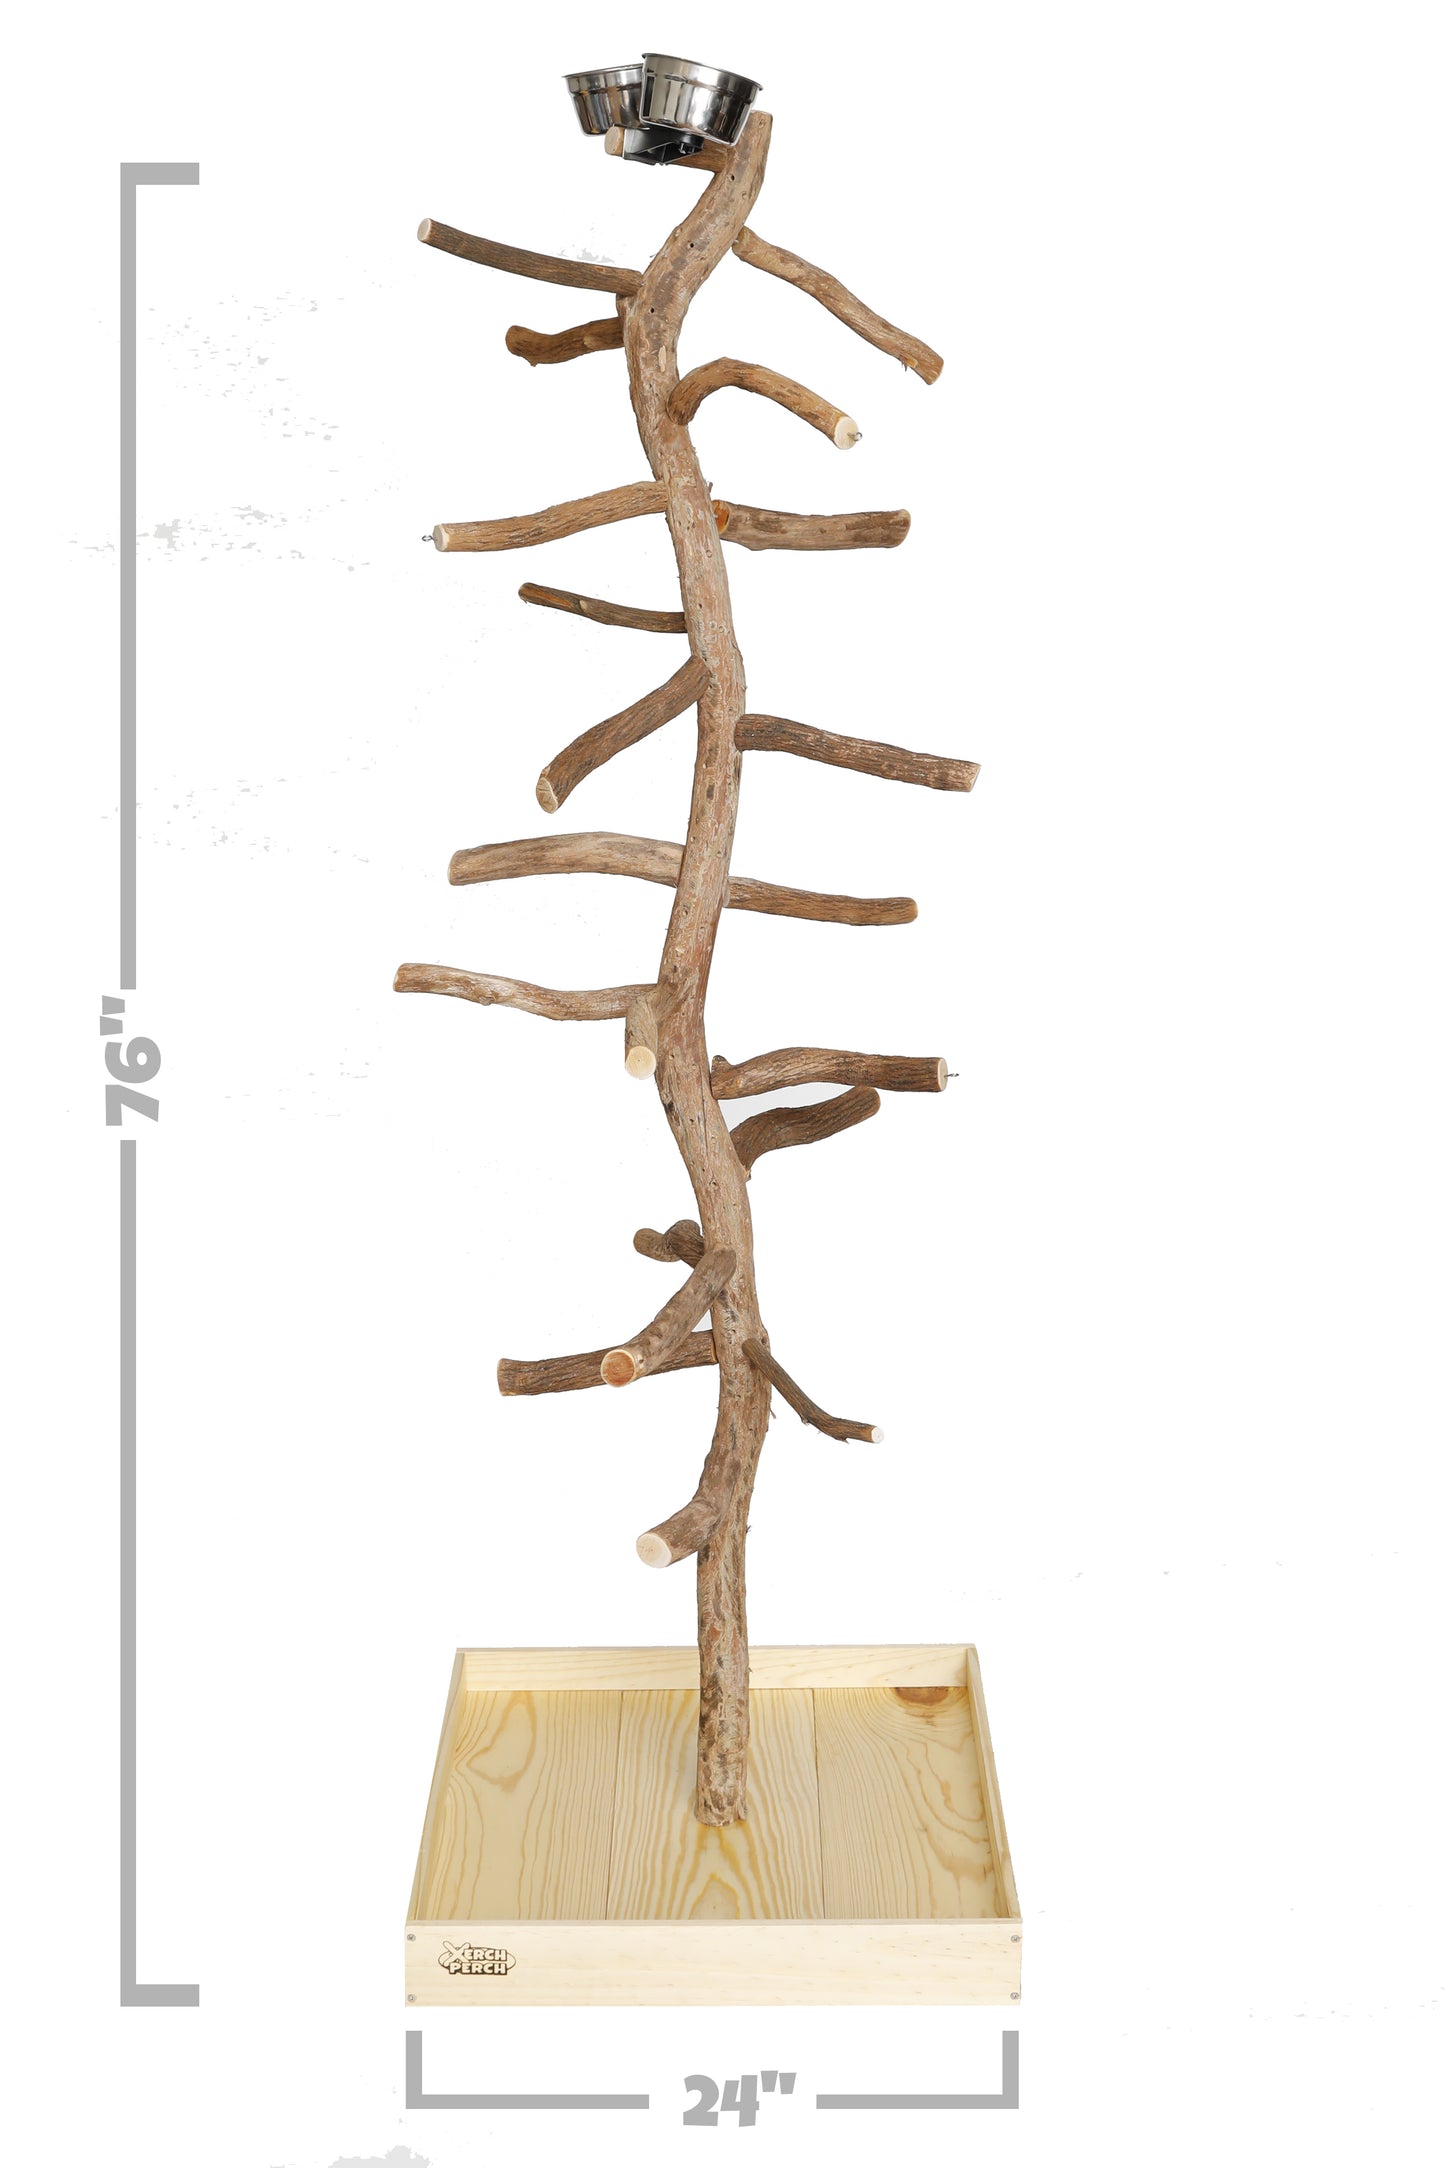 Natural Dragon Wood Parrot Tree Stand Perch, Xerch Perch, The Parrot Mom, Bird Tree, Parrot Play Stand, Wood Tree Perch, Macaw Perch, Bird Tree Stand, Bird T Stand, Modular Parrot Tree Stand, Dragon Wood,